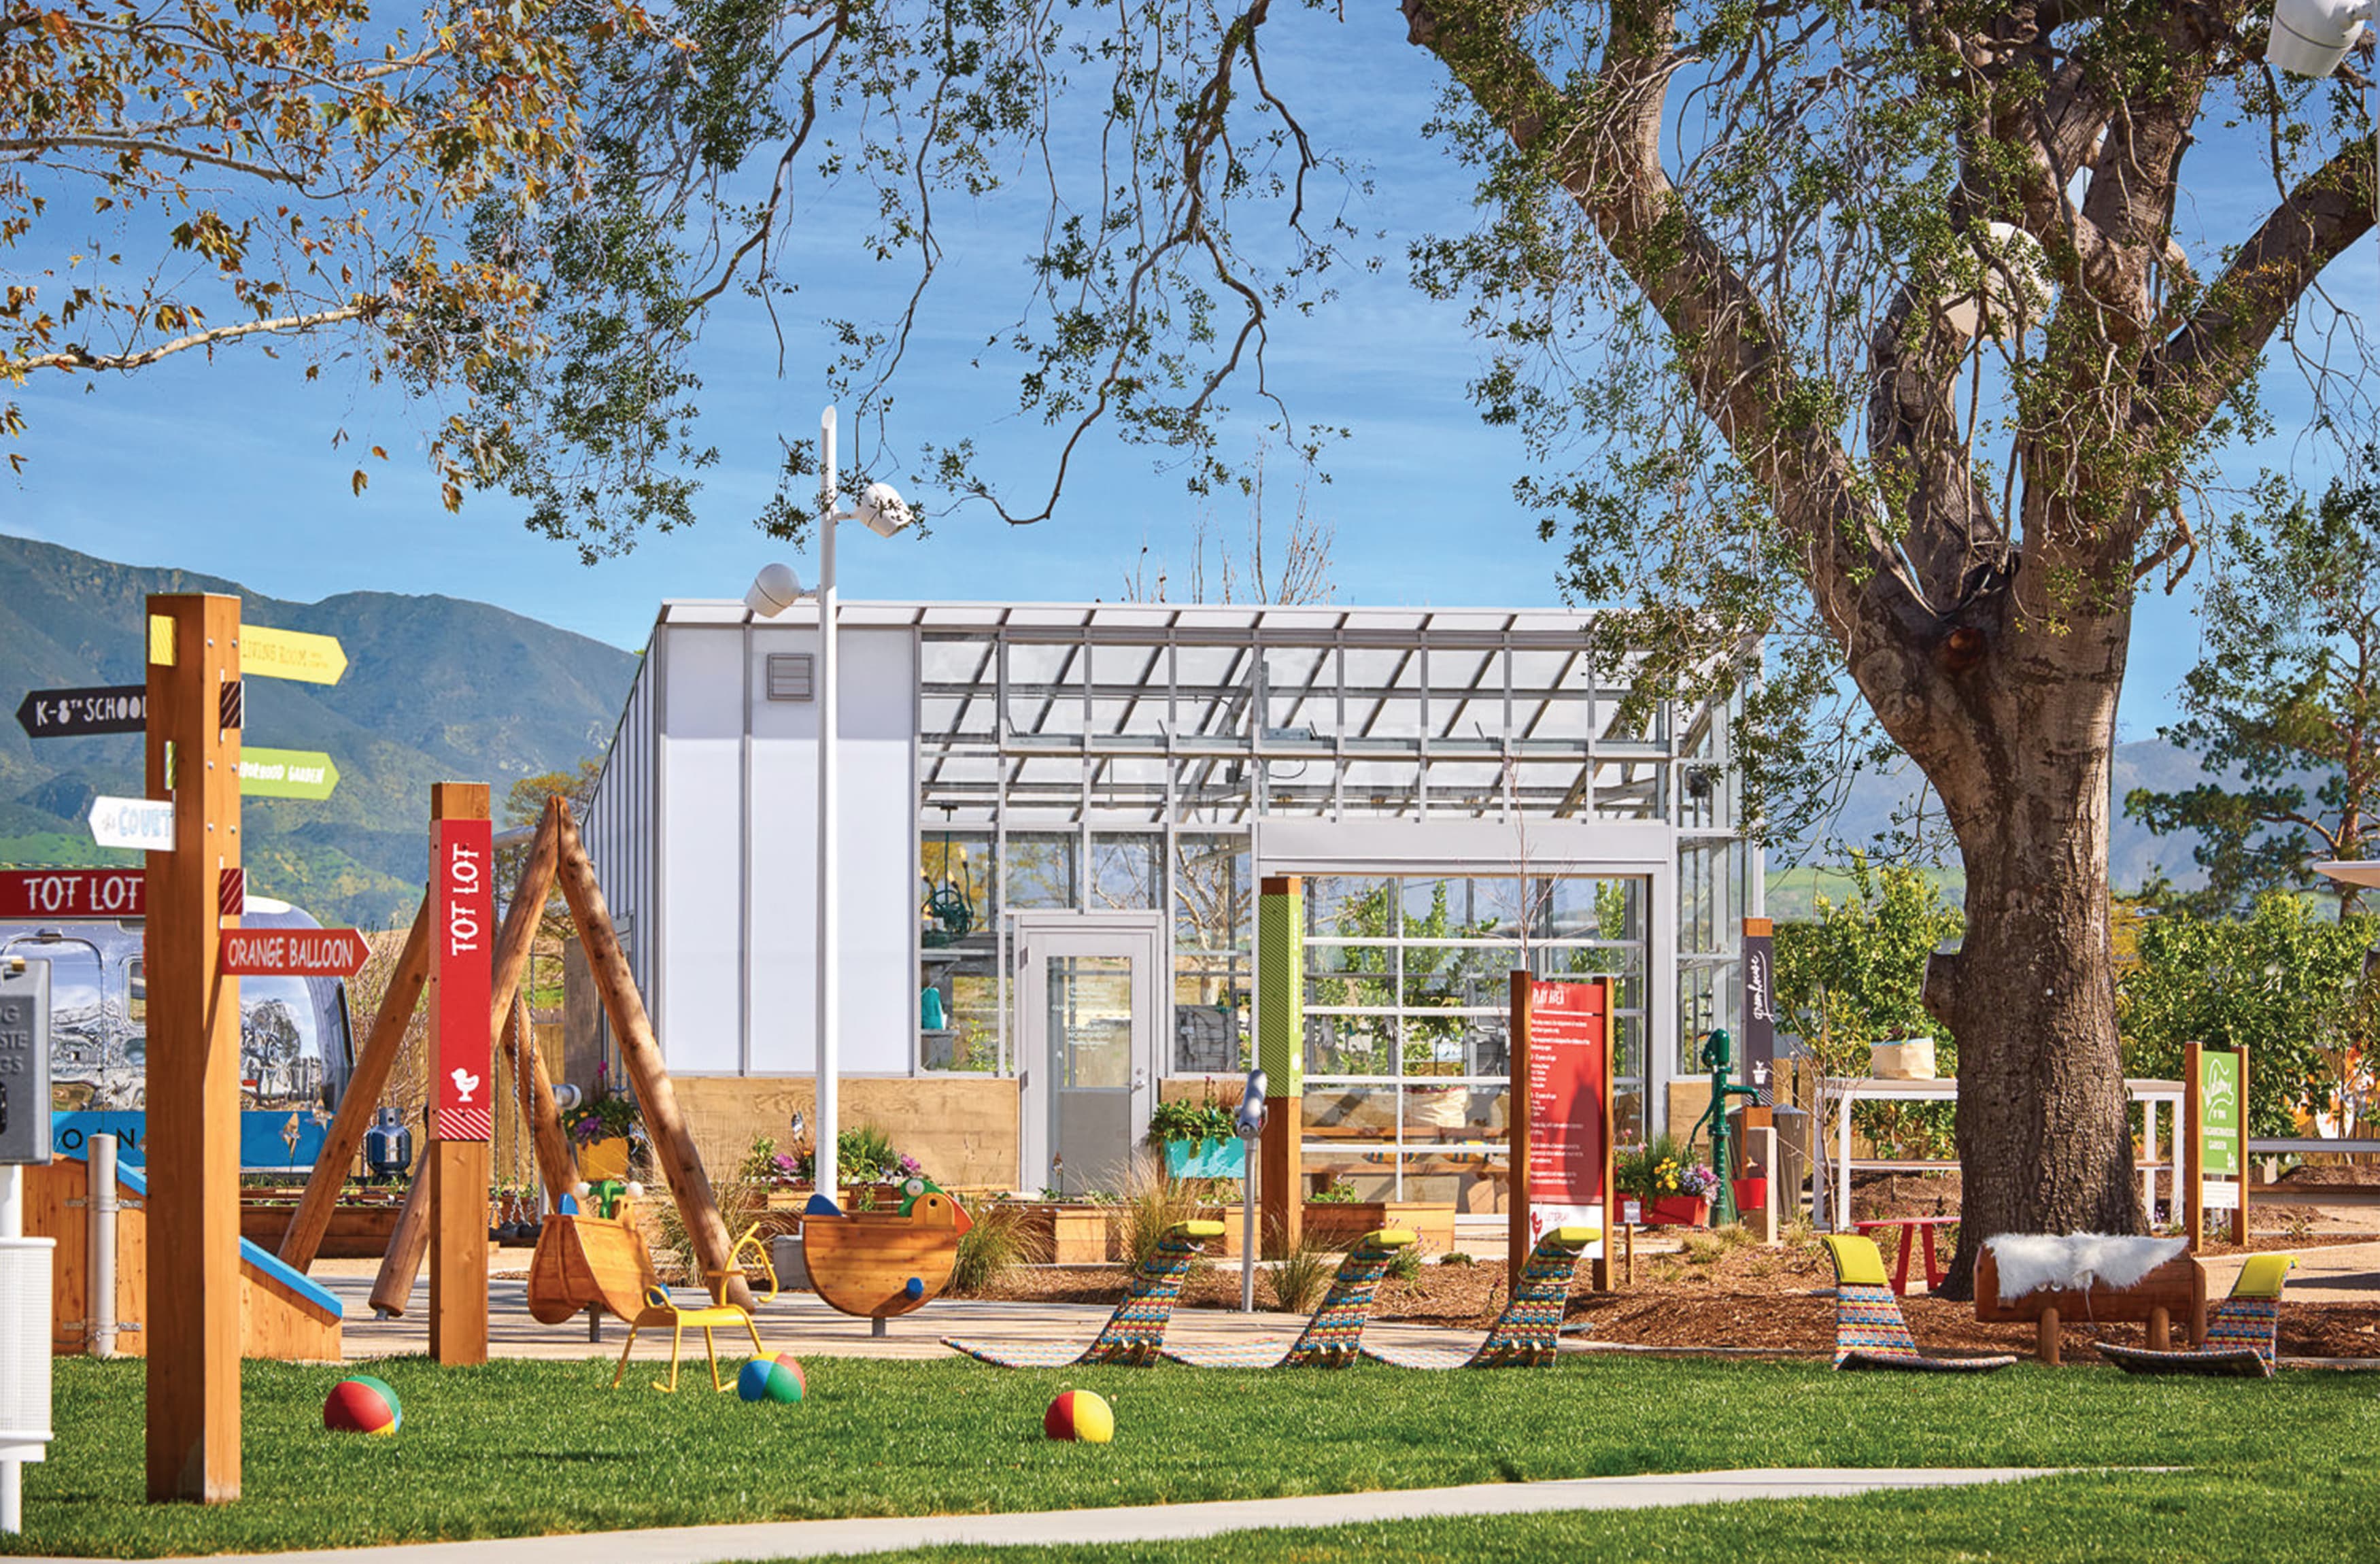 A playground for all ages of kids with colorful placemaking elements and wayfinding signage to direct visitors